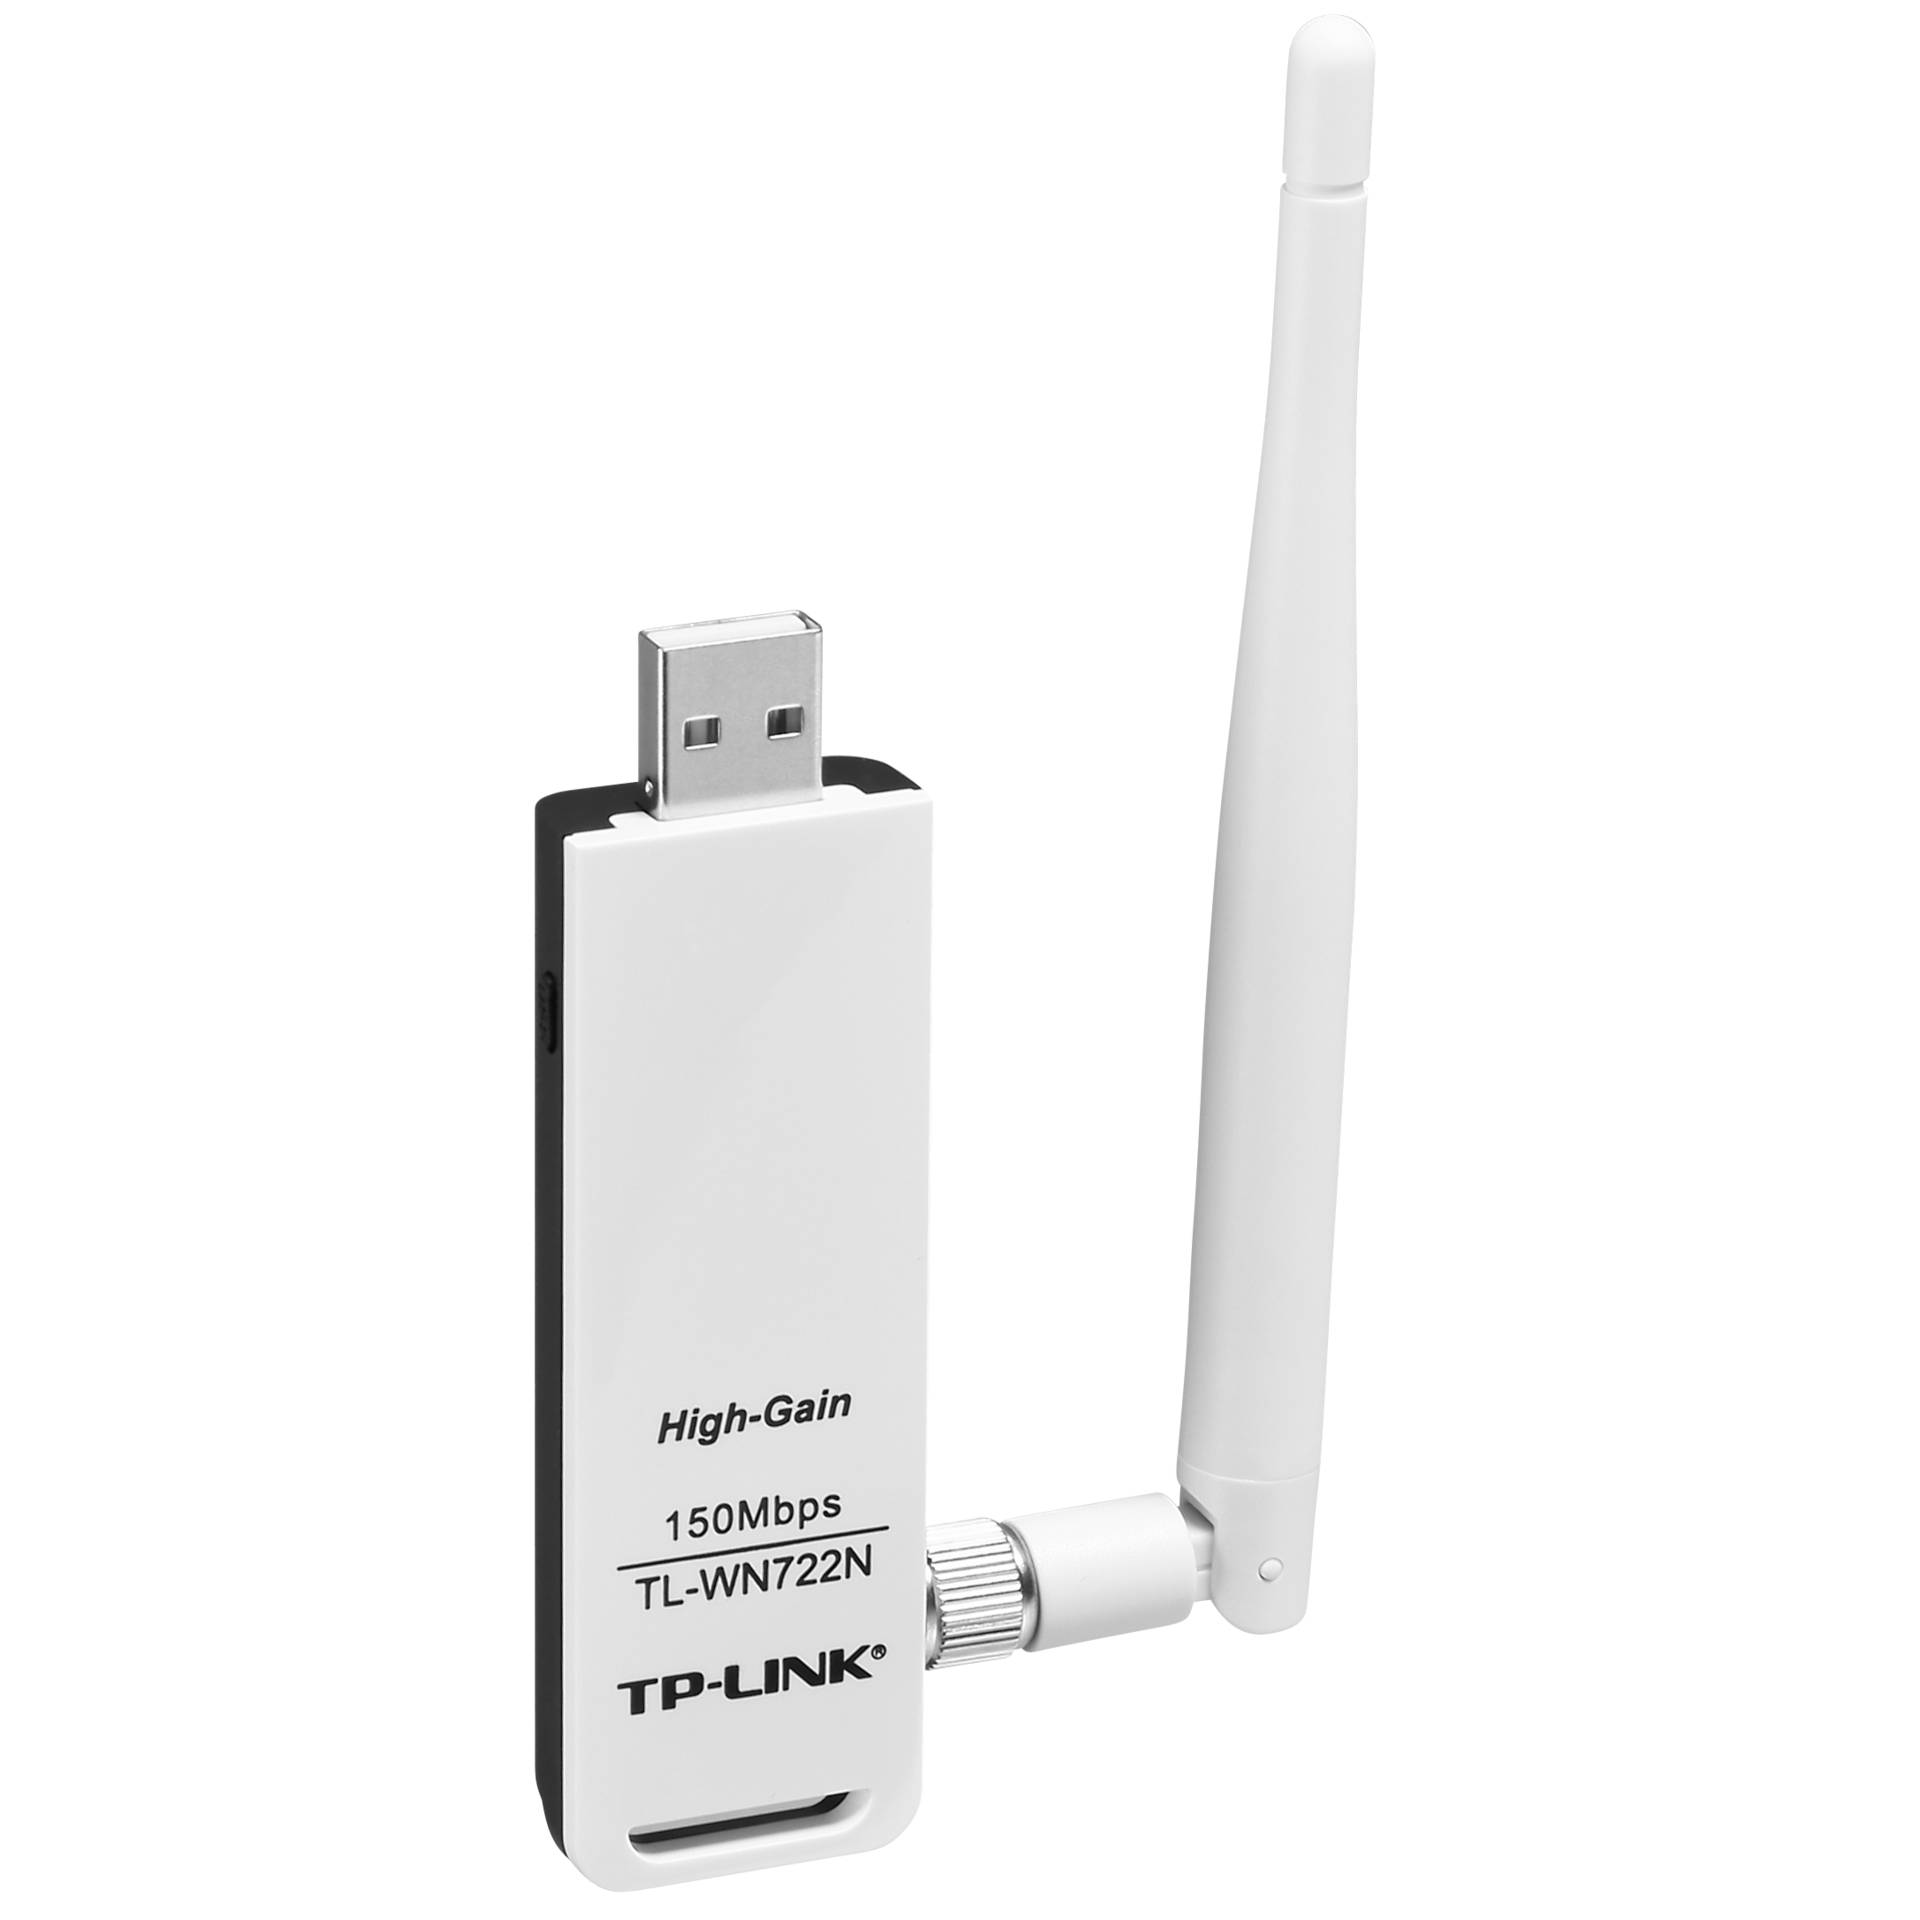 TP-LINK TL-WN722N 150Mbps/ 2.4GHz High-Gain-WLAN-USB-Adapter